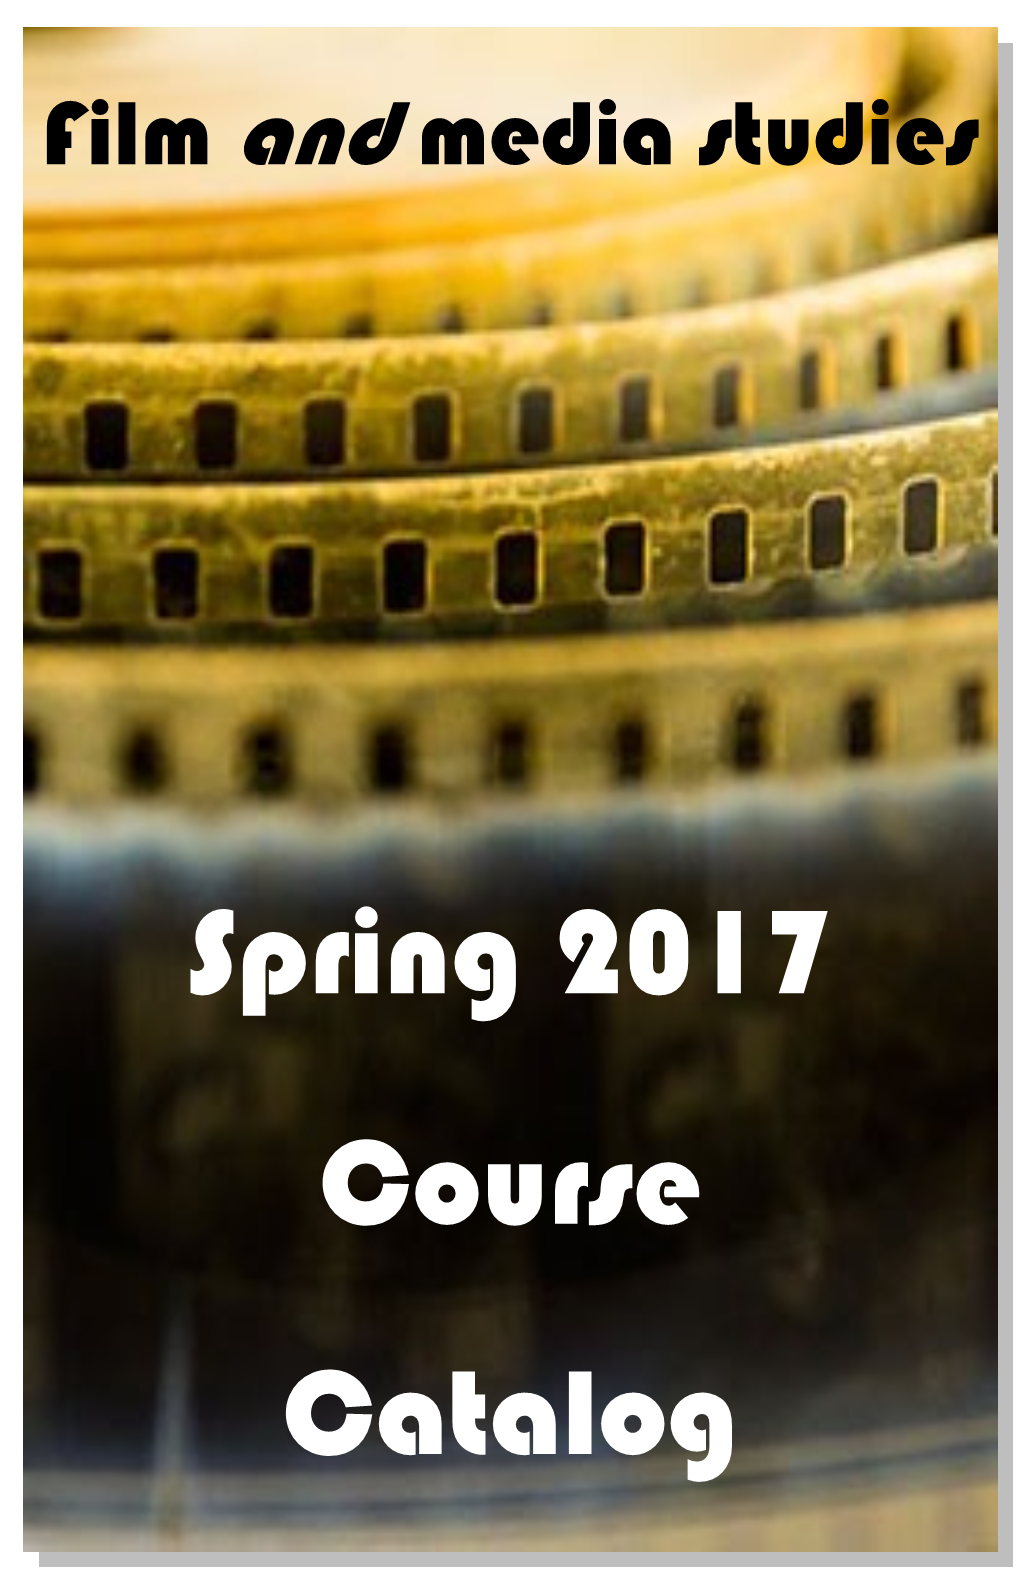 Spring 2017 Course Catalog FILM & MEDIA STUDIES Spring 2017 Preliminary Course List (Updated 1/5/17)